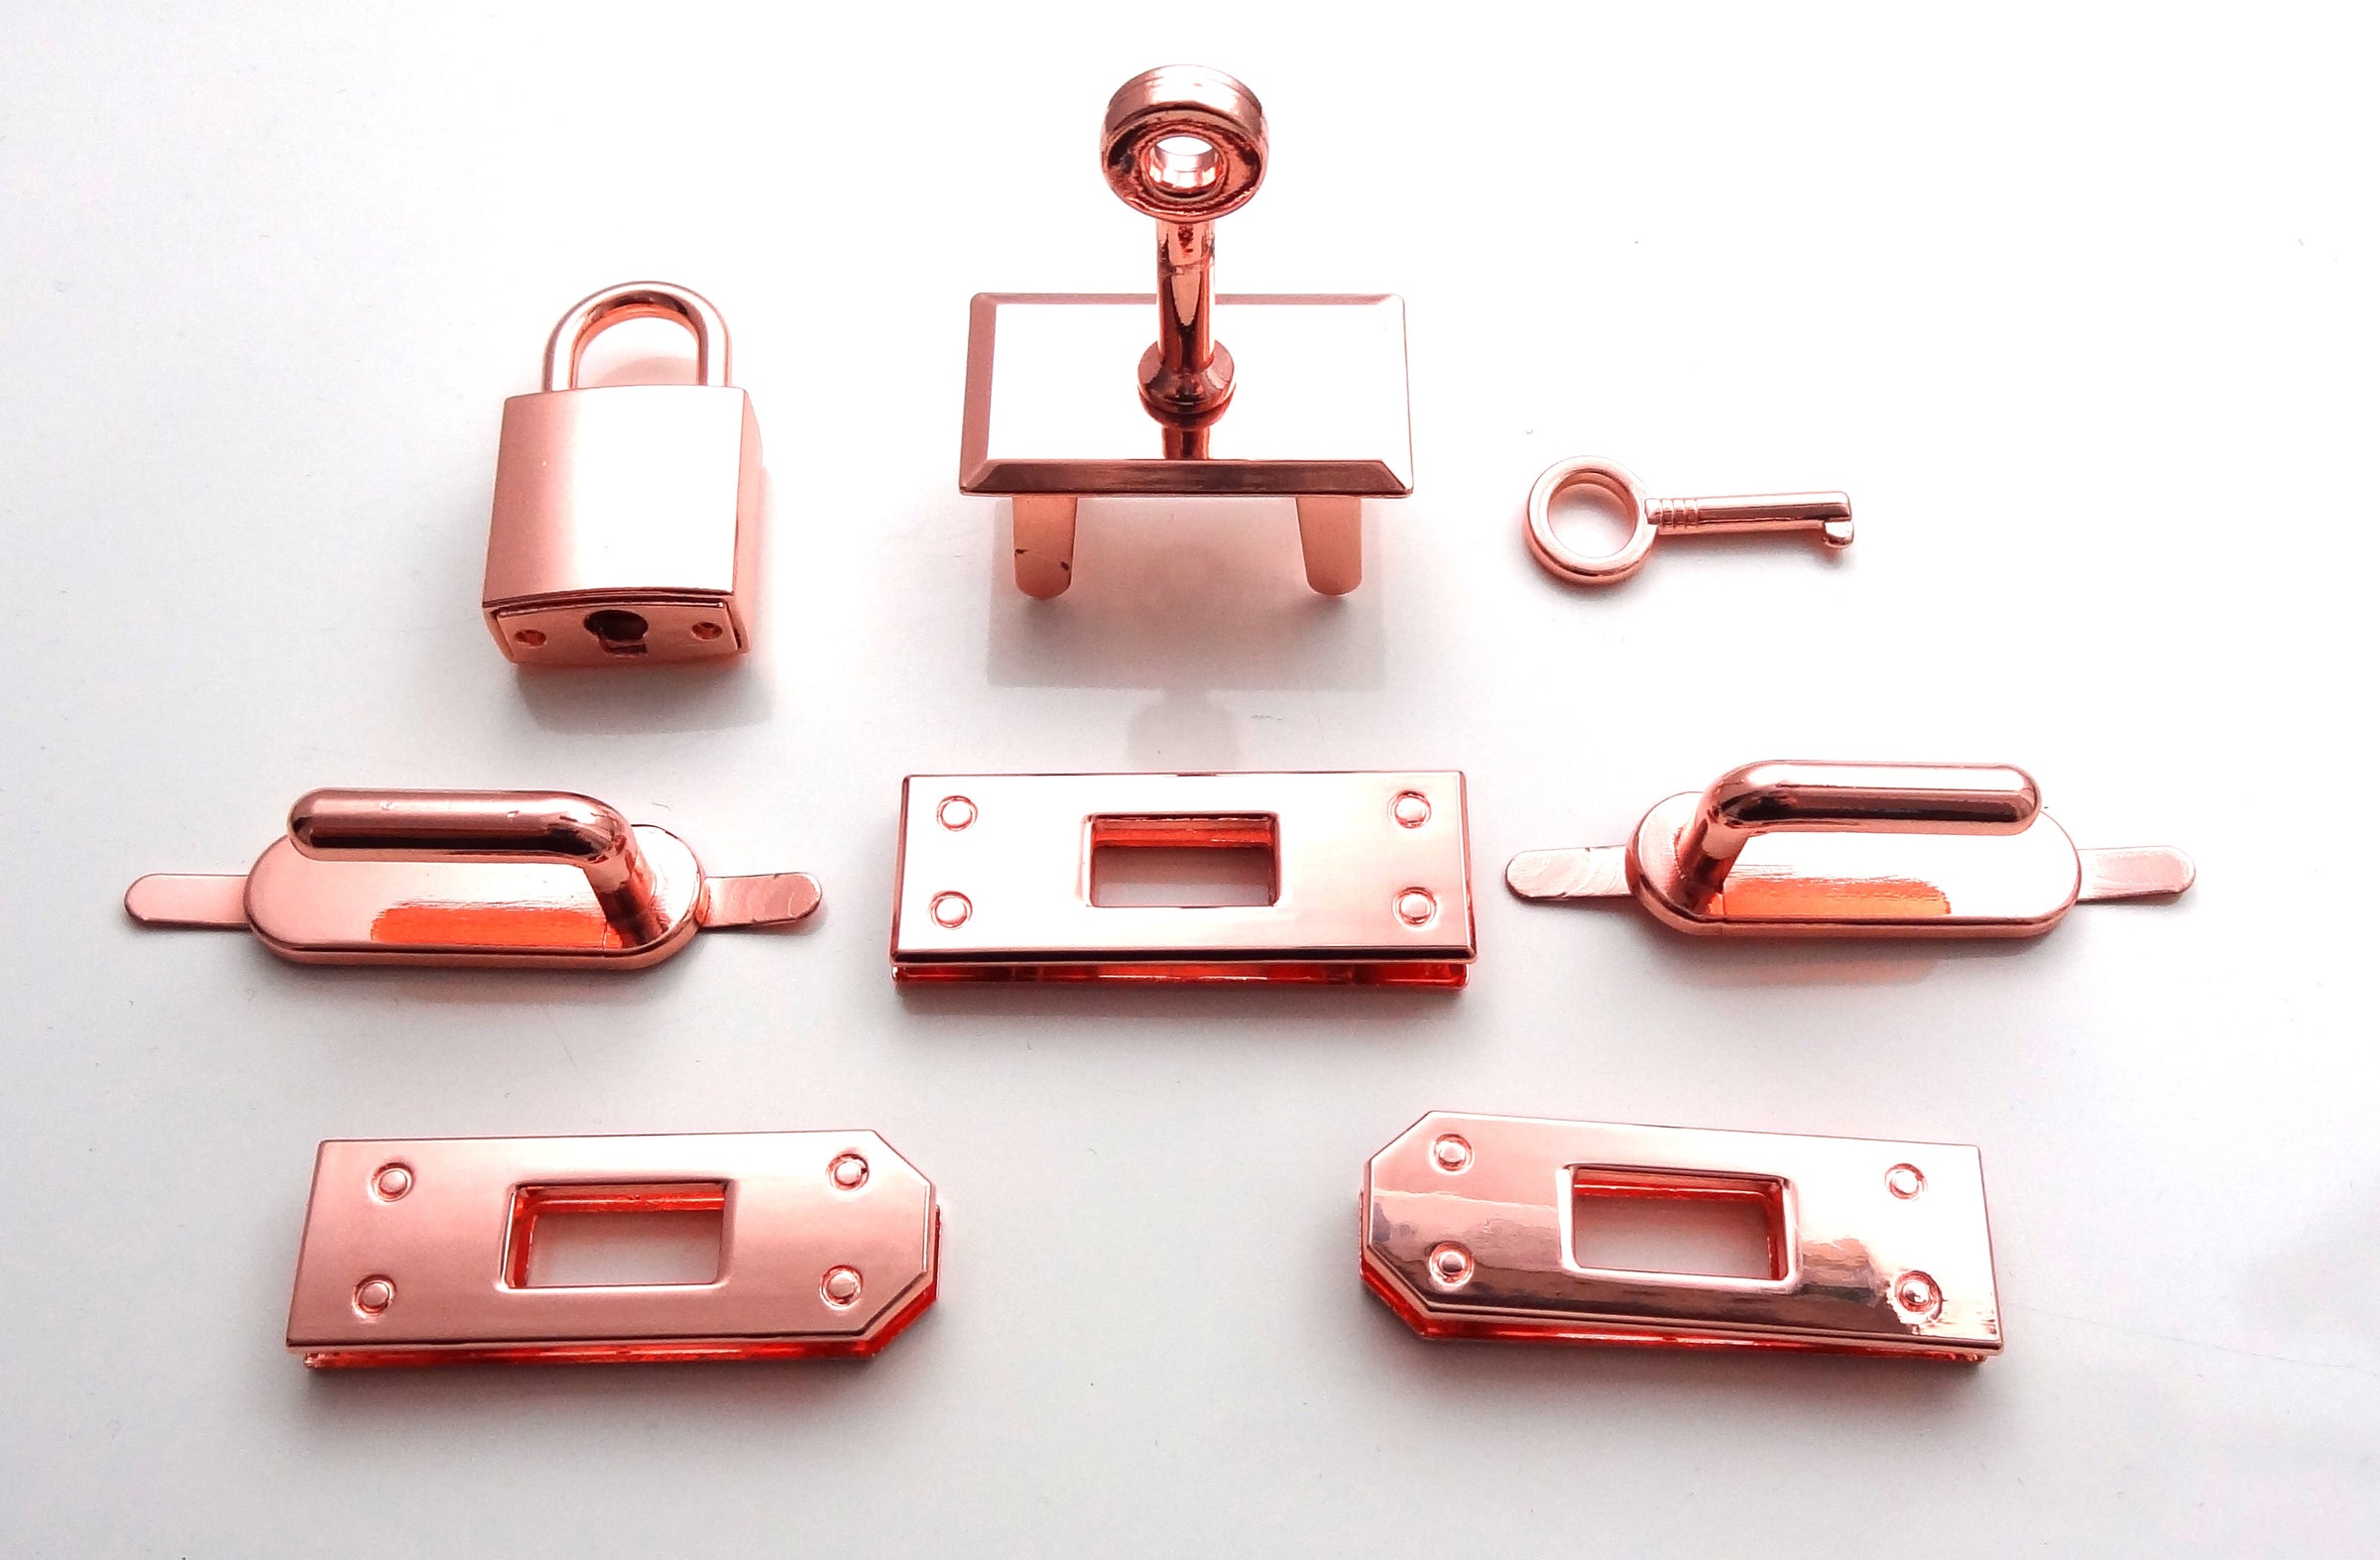 Accessories, Sold Authentic Hermes Birkin Lock And Key